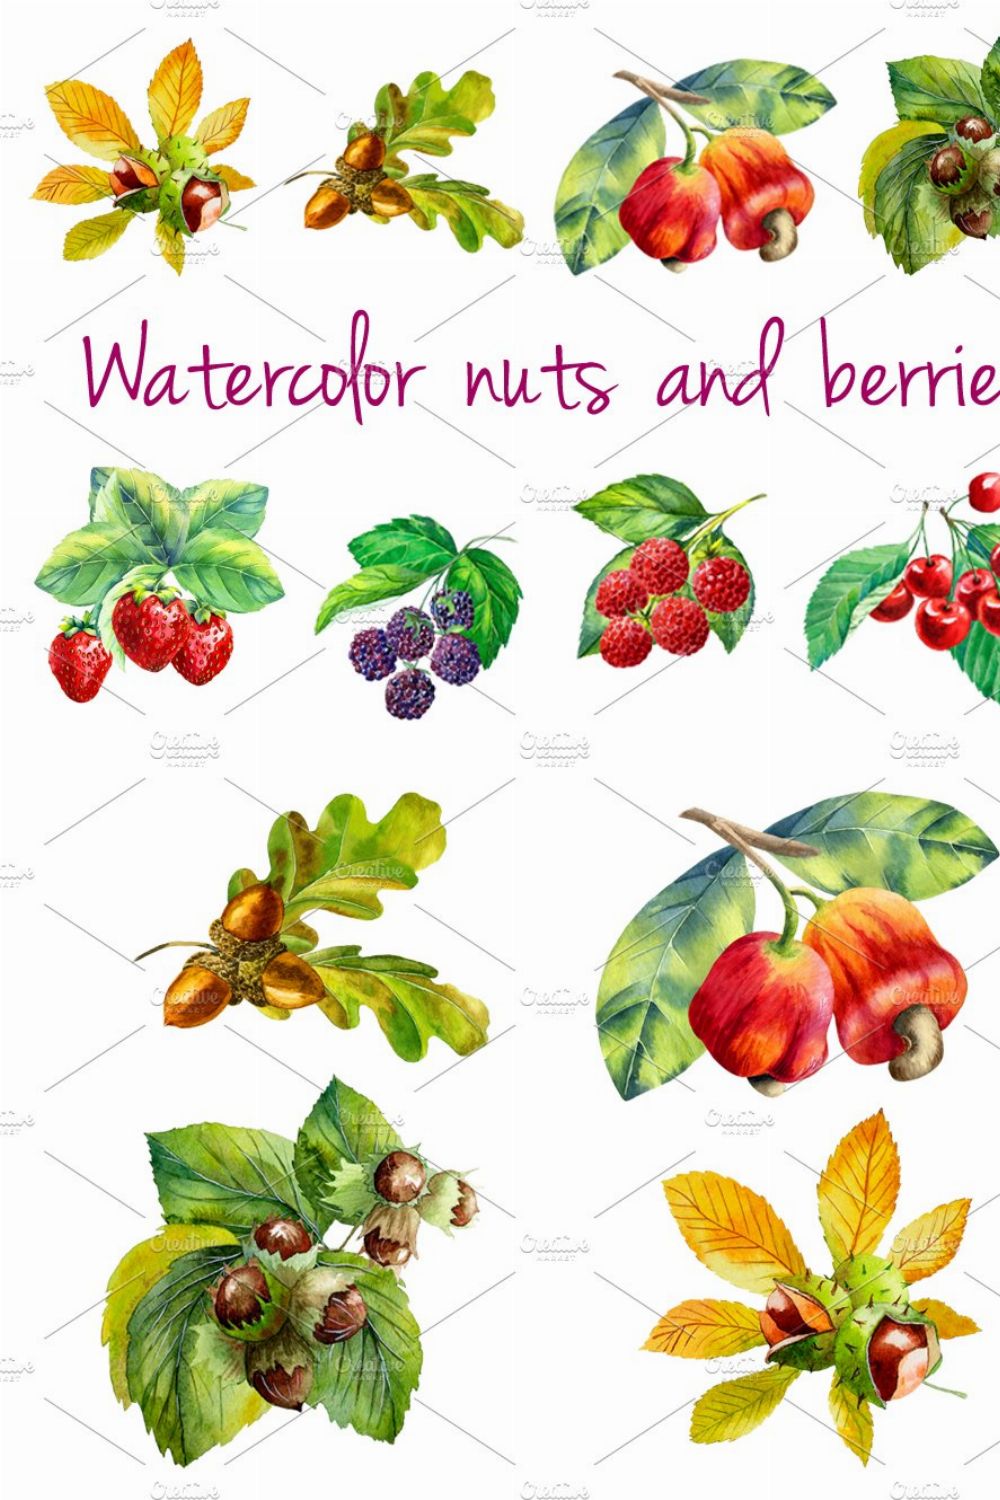 Watercolor nuts and berries pinterest preview image.